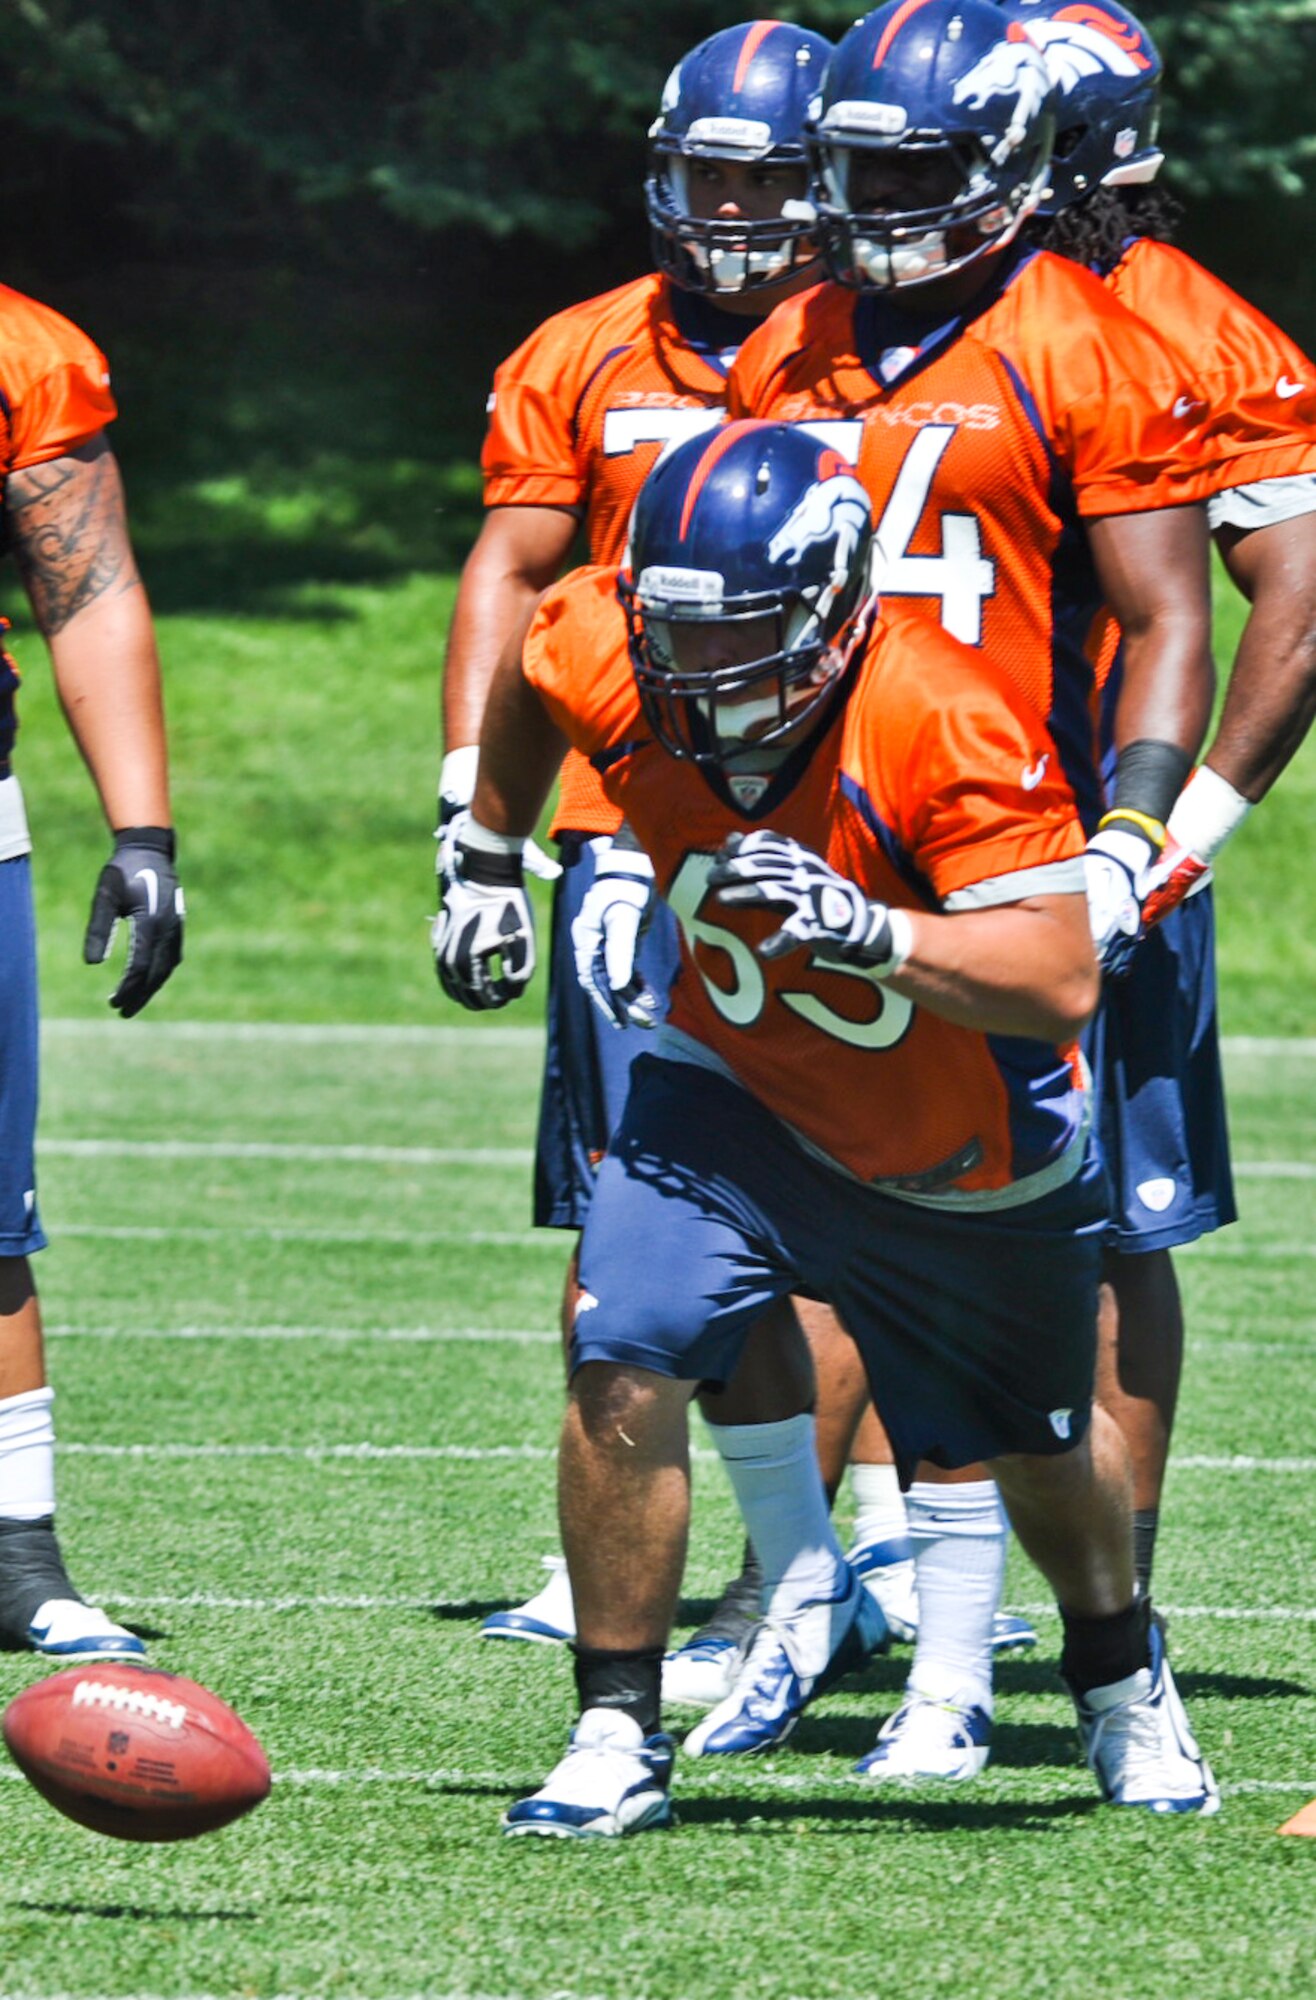 ENGLEWOOD, Colo. – Benjamin Garland participates in a drill during a Denver Bronco’s mini-camp session June 13, 2012. Garland, a defensive end for Broncos, signed a three-year contract with the team in 2010. (U.S. Air Force photo by Senior Airman Christopher Gross)